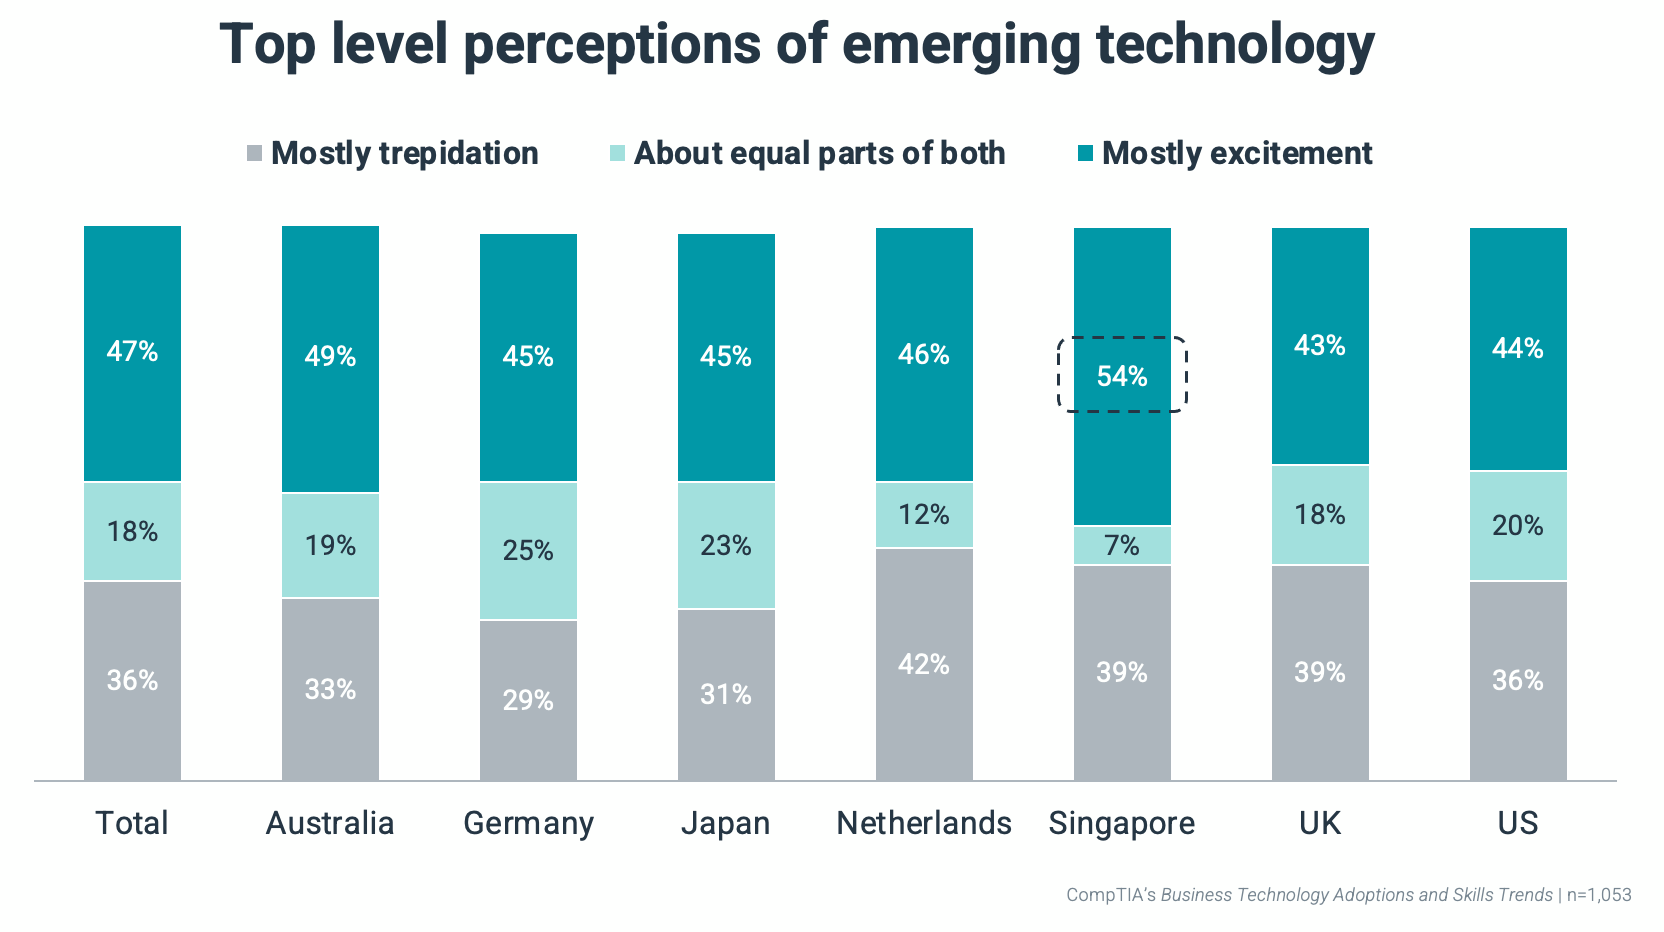 Top level perceptions of emerging technology